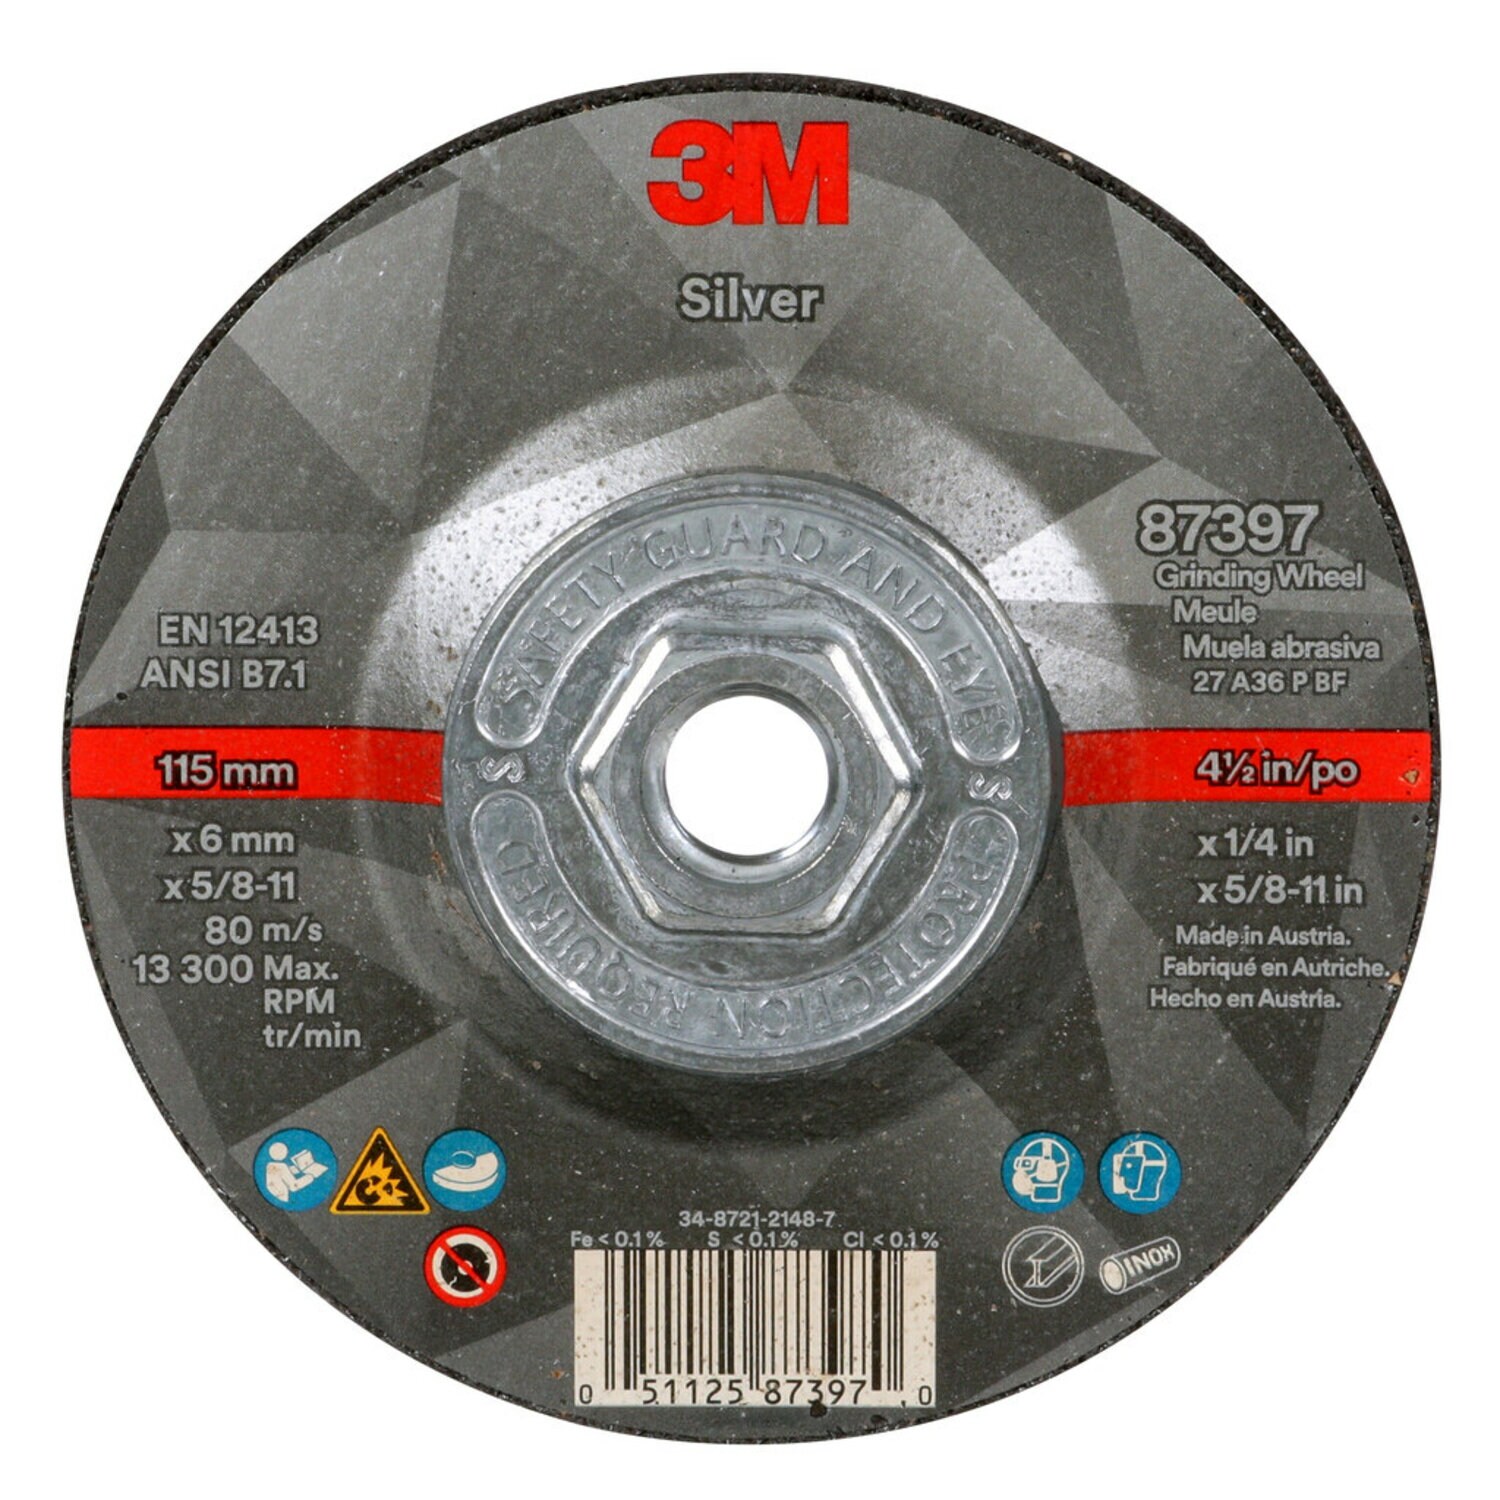 7100245024 - 3M Silver Depressed Center Grinding Wheel, 87397, T27 Quick Change, 4.5
in x 1/4 in x 5/8 in-11 in, 10/Carton, 20 ea/Case